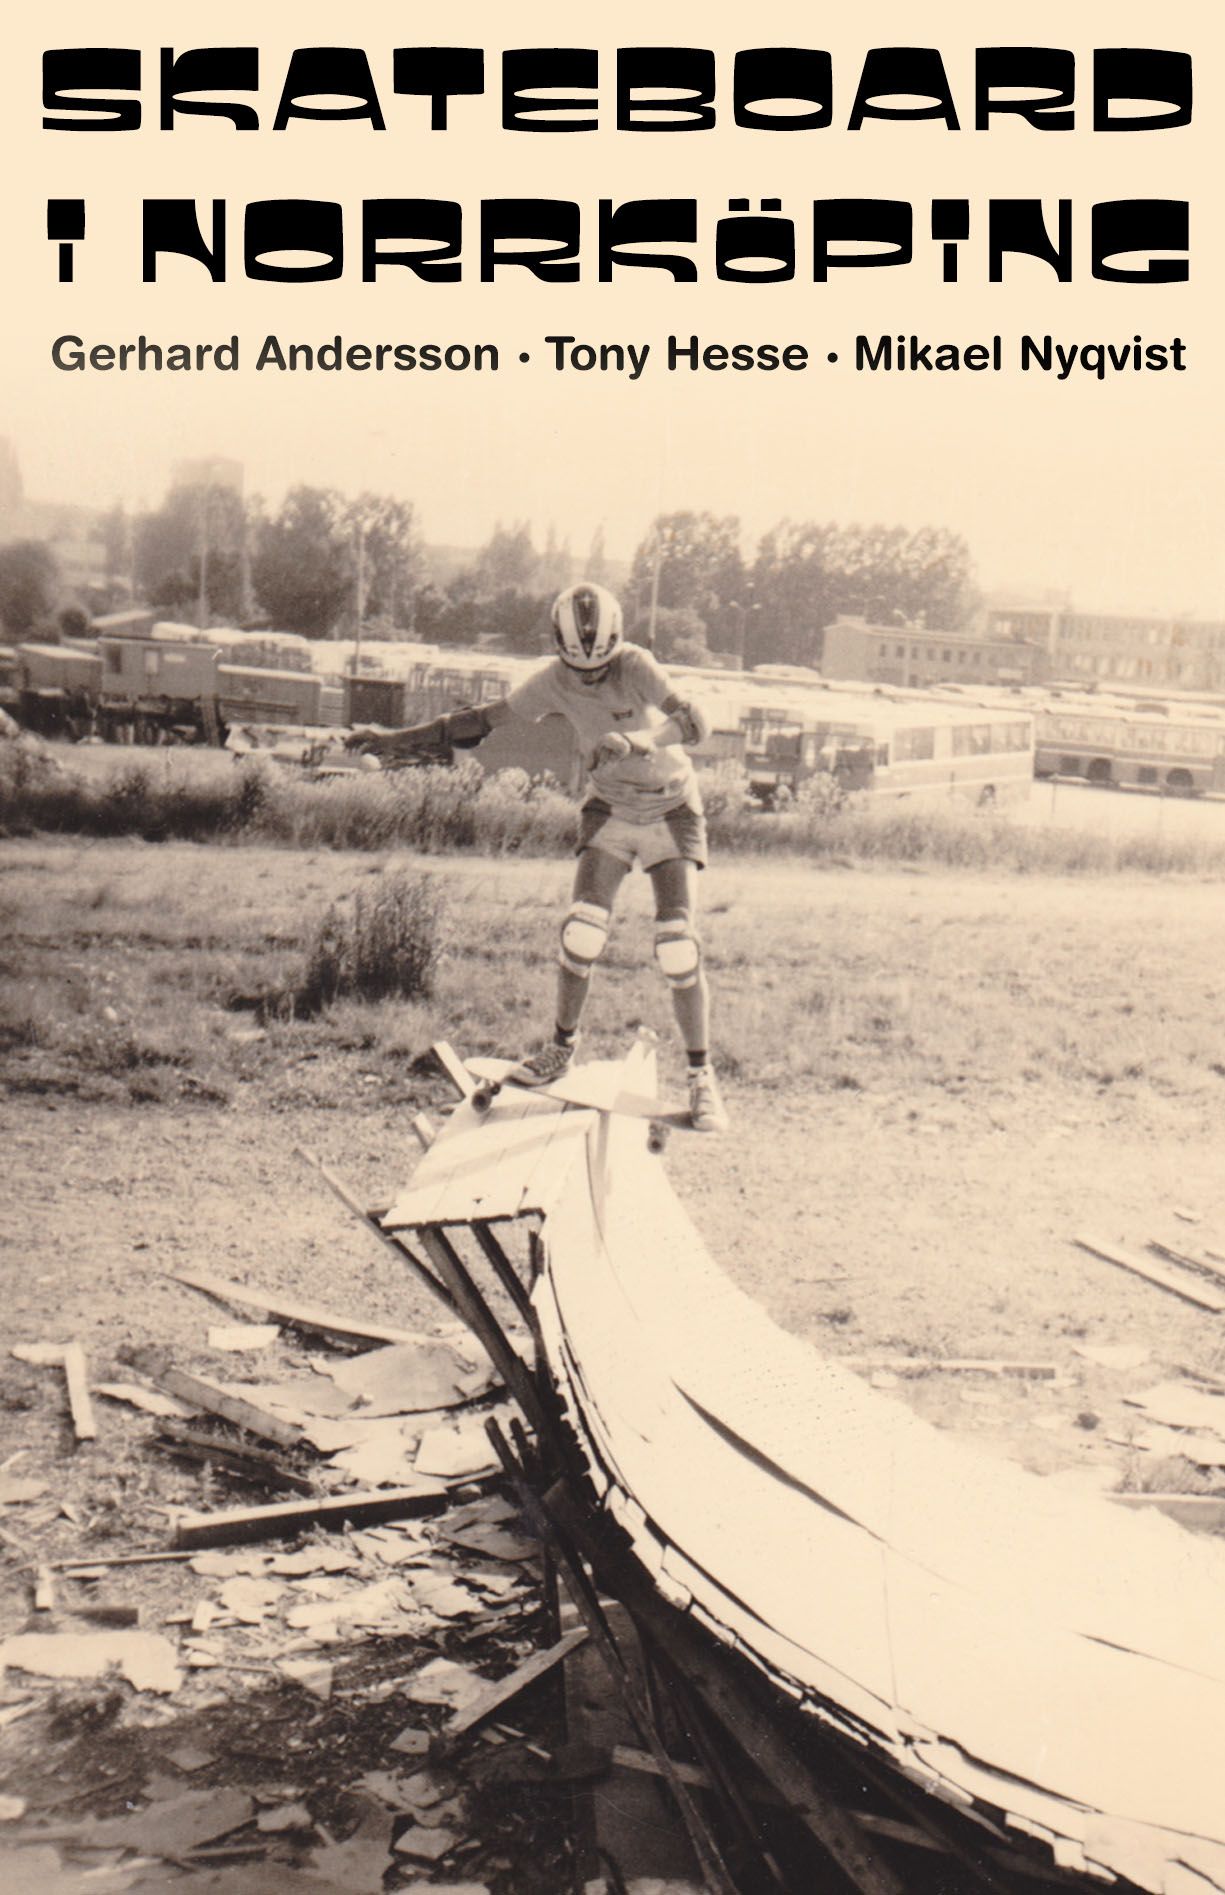 Skateboard i Norrköping, eBook by Gerhard Andersson, Tony Hesse, Mikael Nyqvist